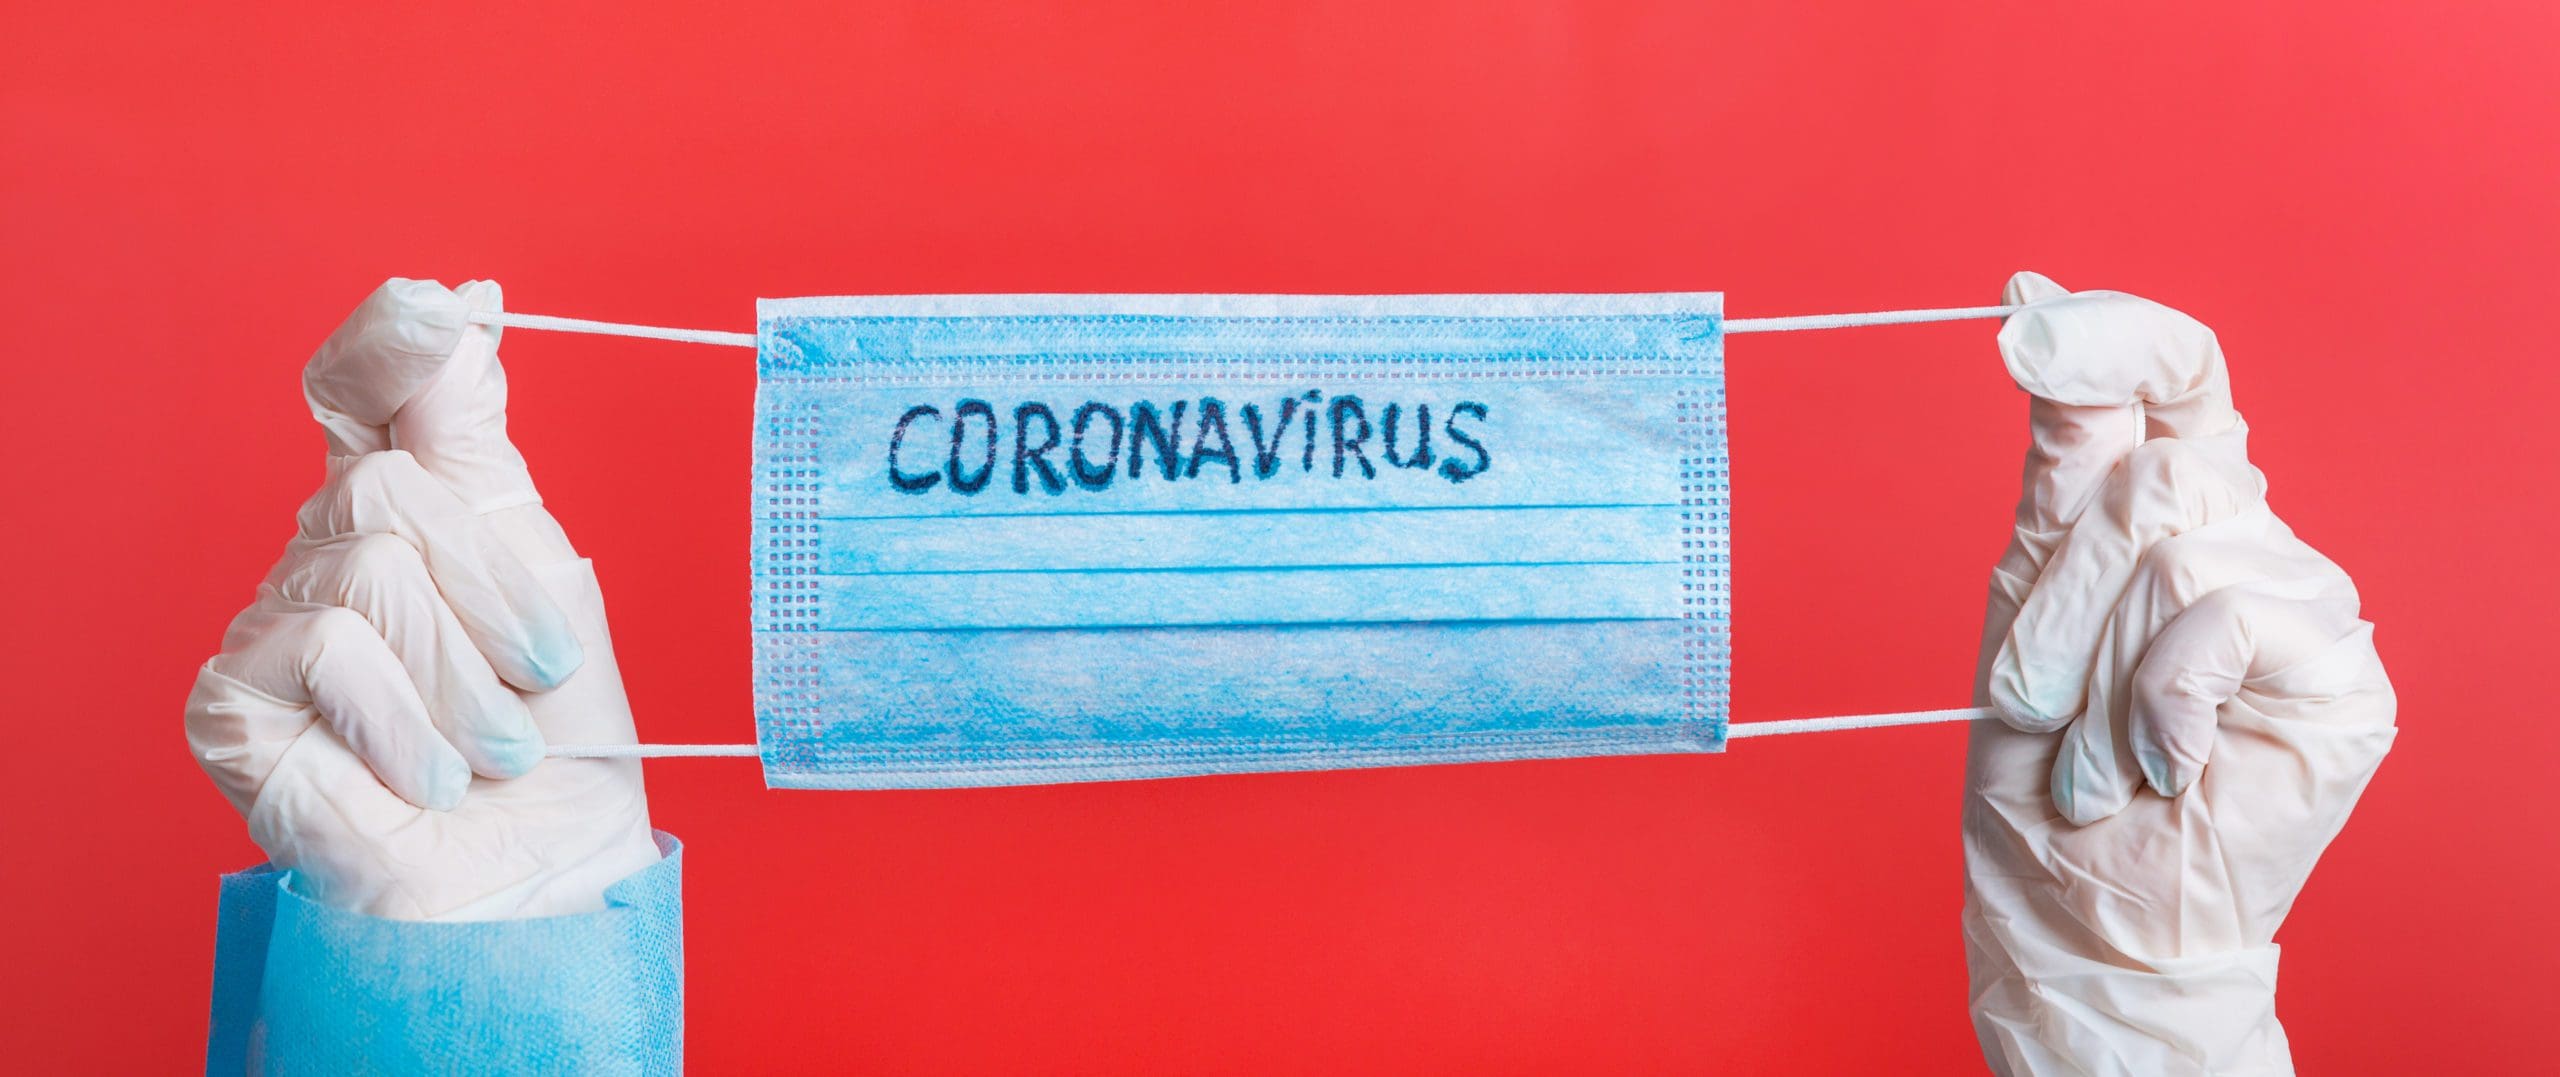 Female hands in medical gloves holding protective mask with coronavirus text on it at red background. Health care concept. Coronavirus concept.